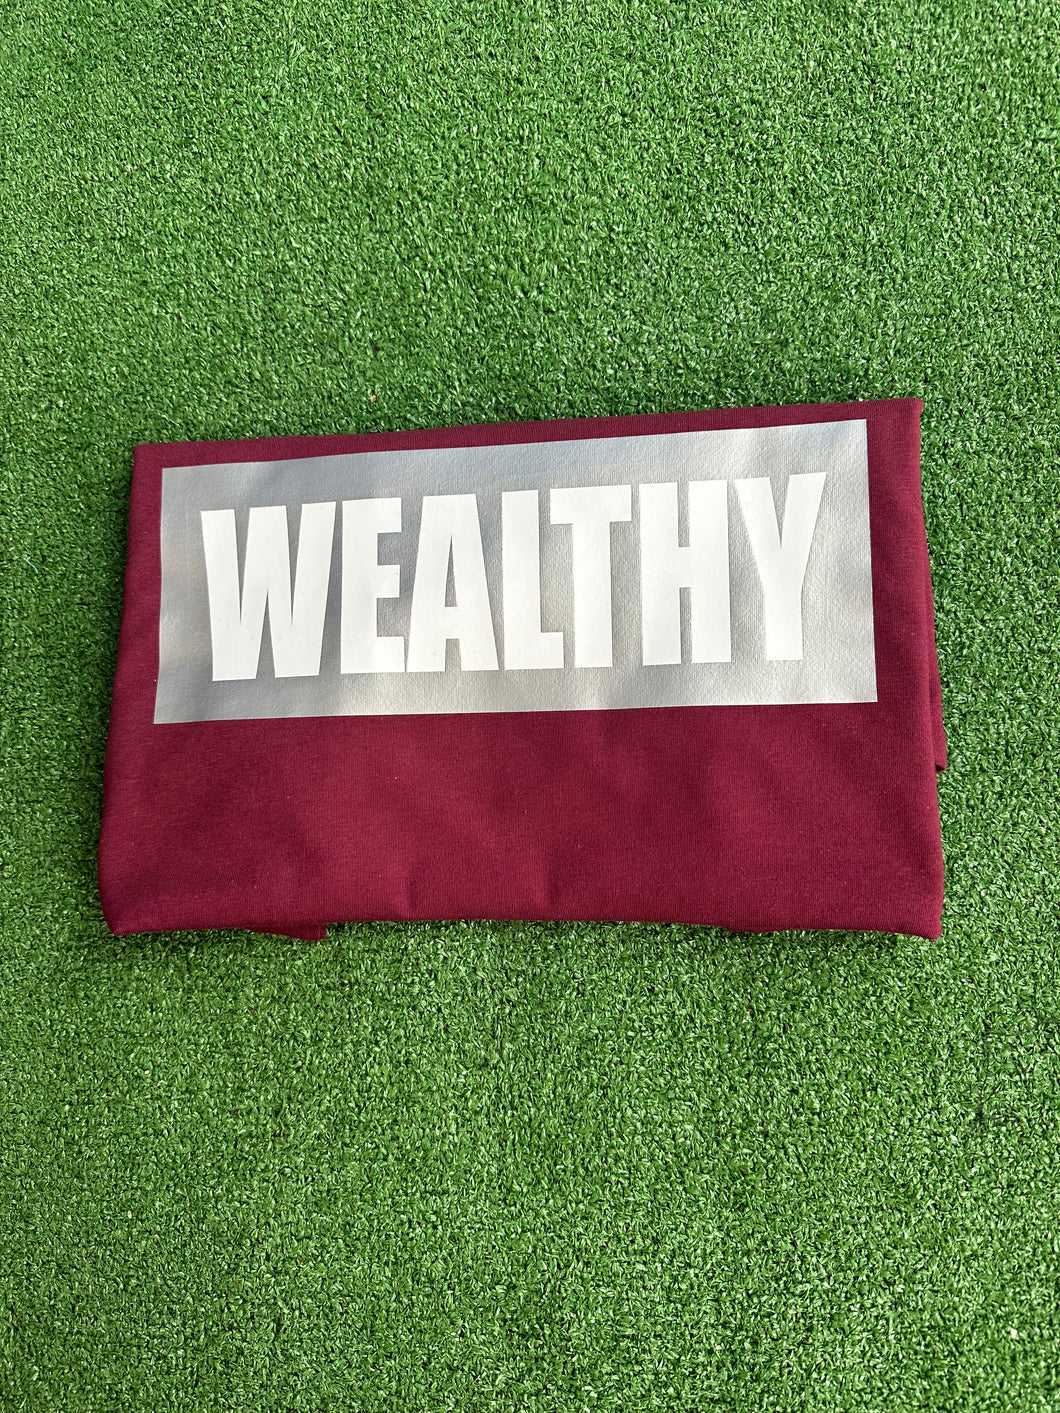 Wealthy Tee (Burgundy/Silver/White)